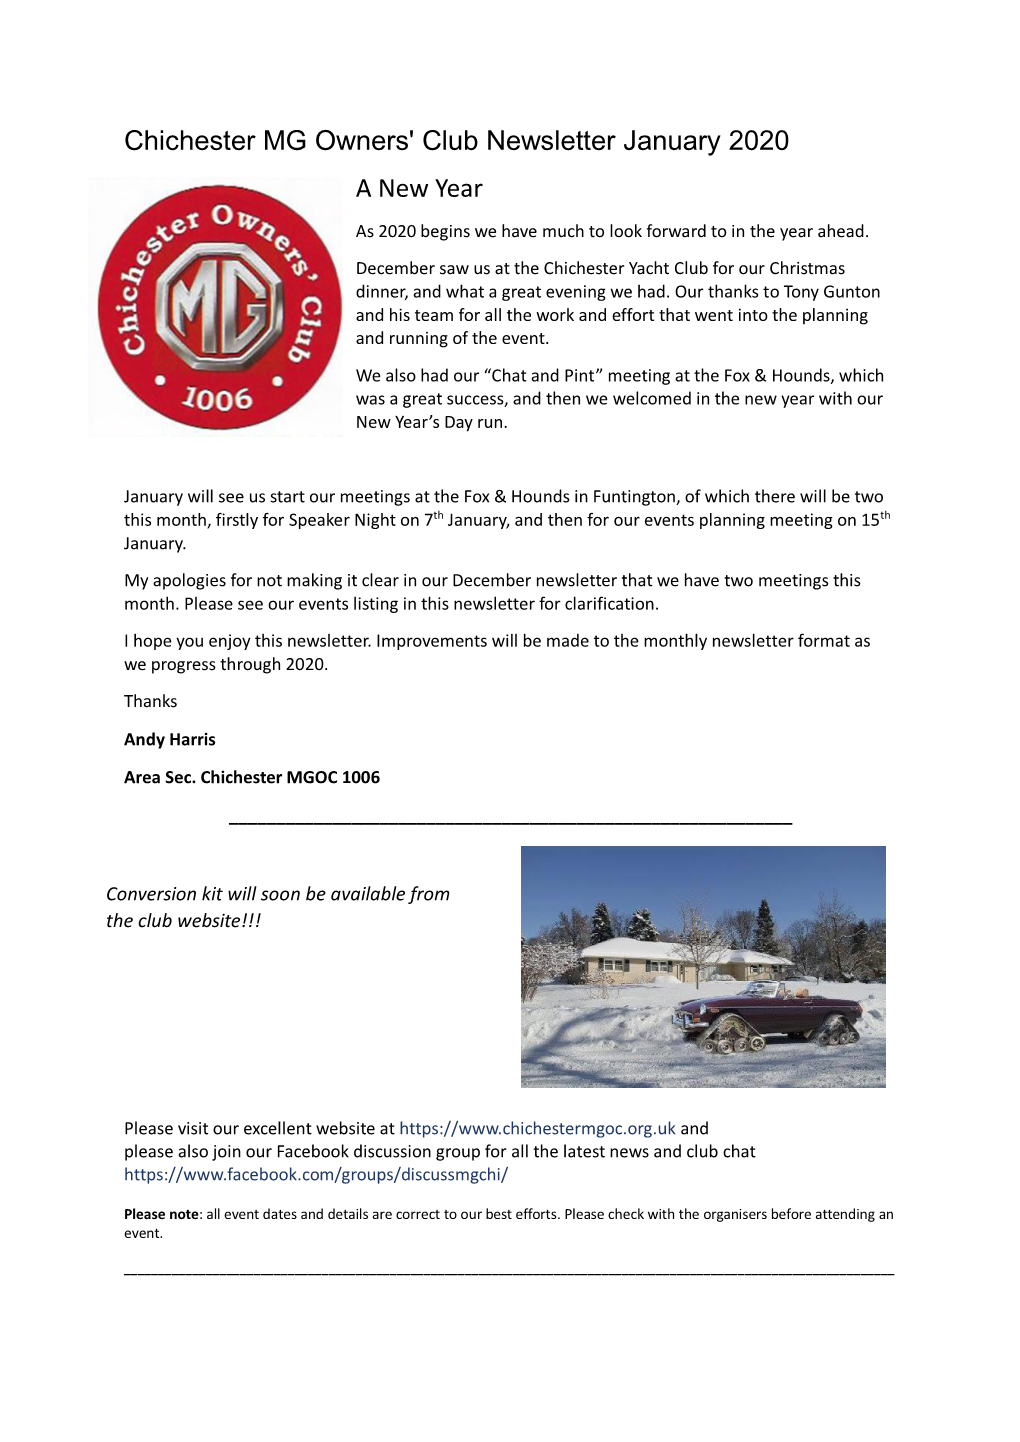 Chichester MG Owners' Club Newsletter January 2020 a New Year